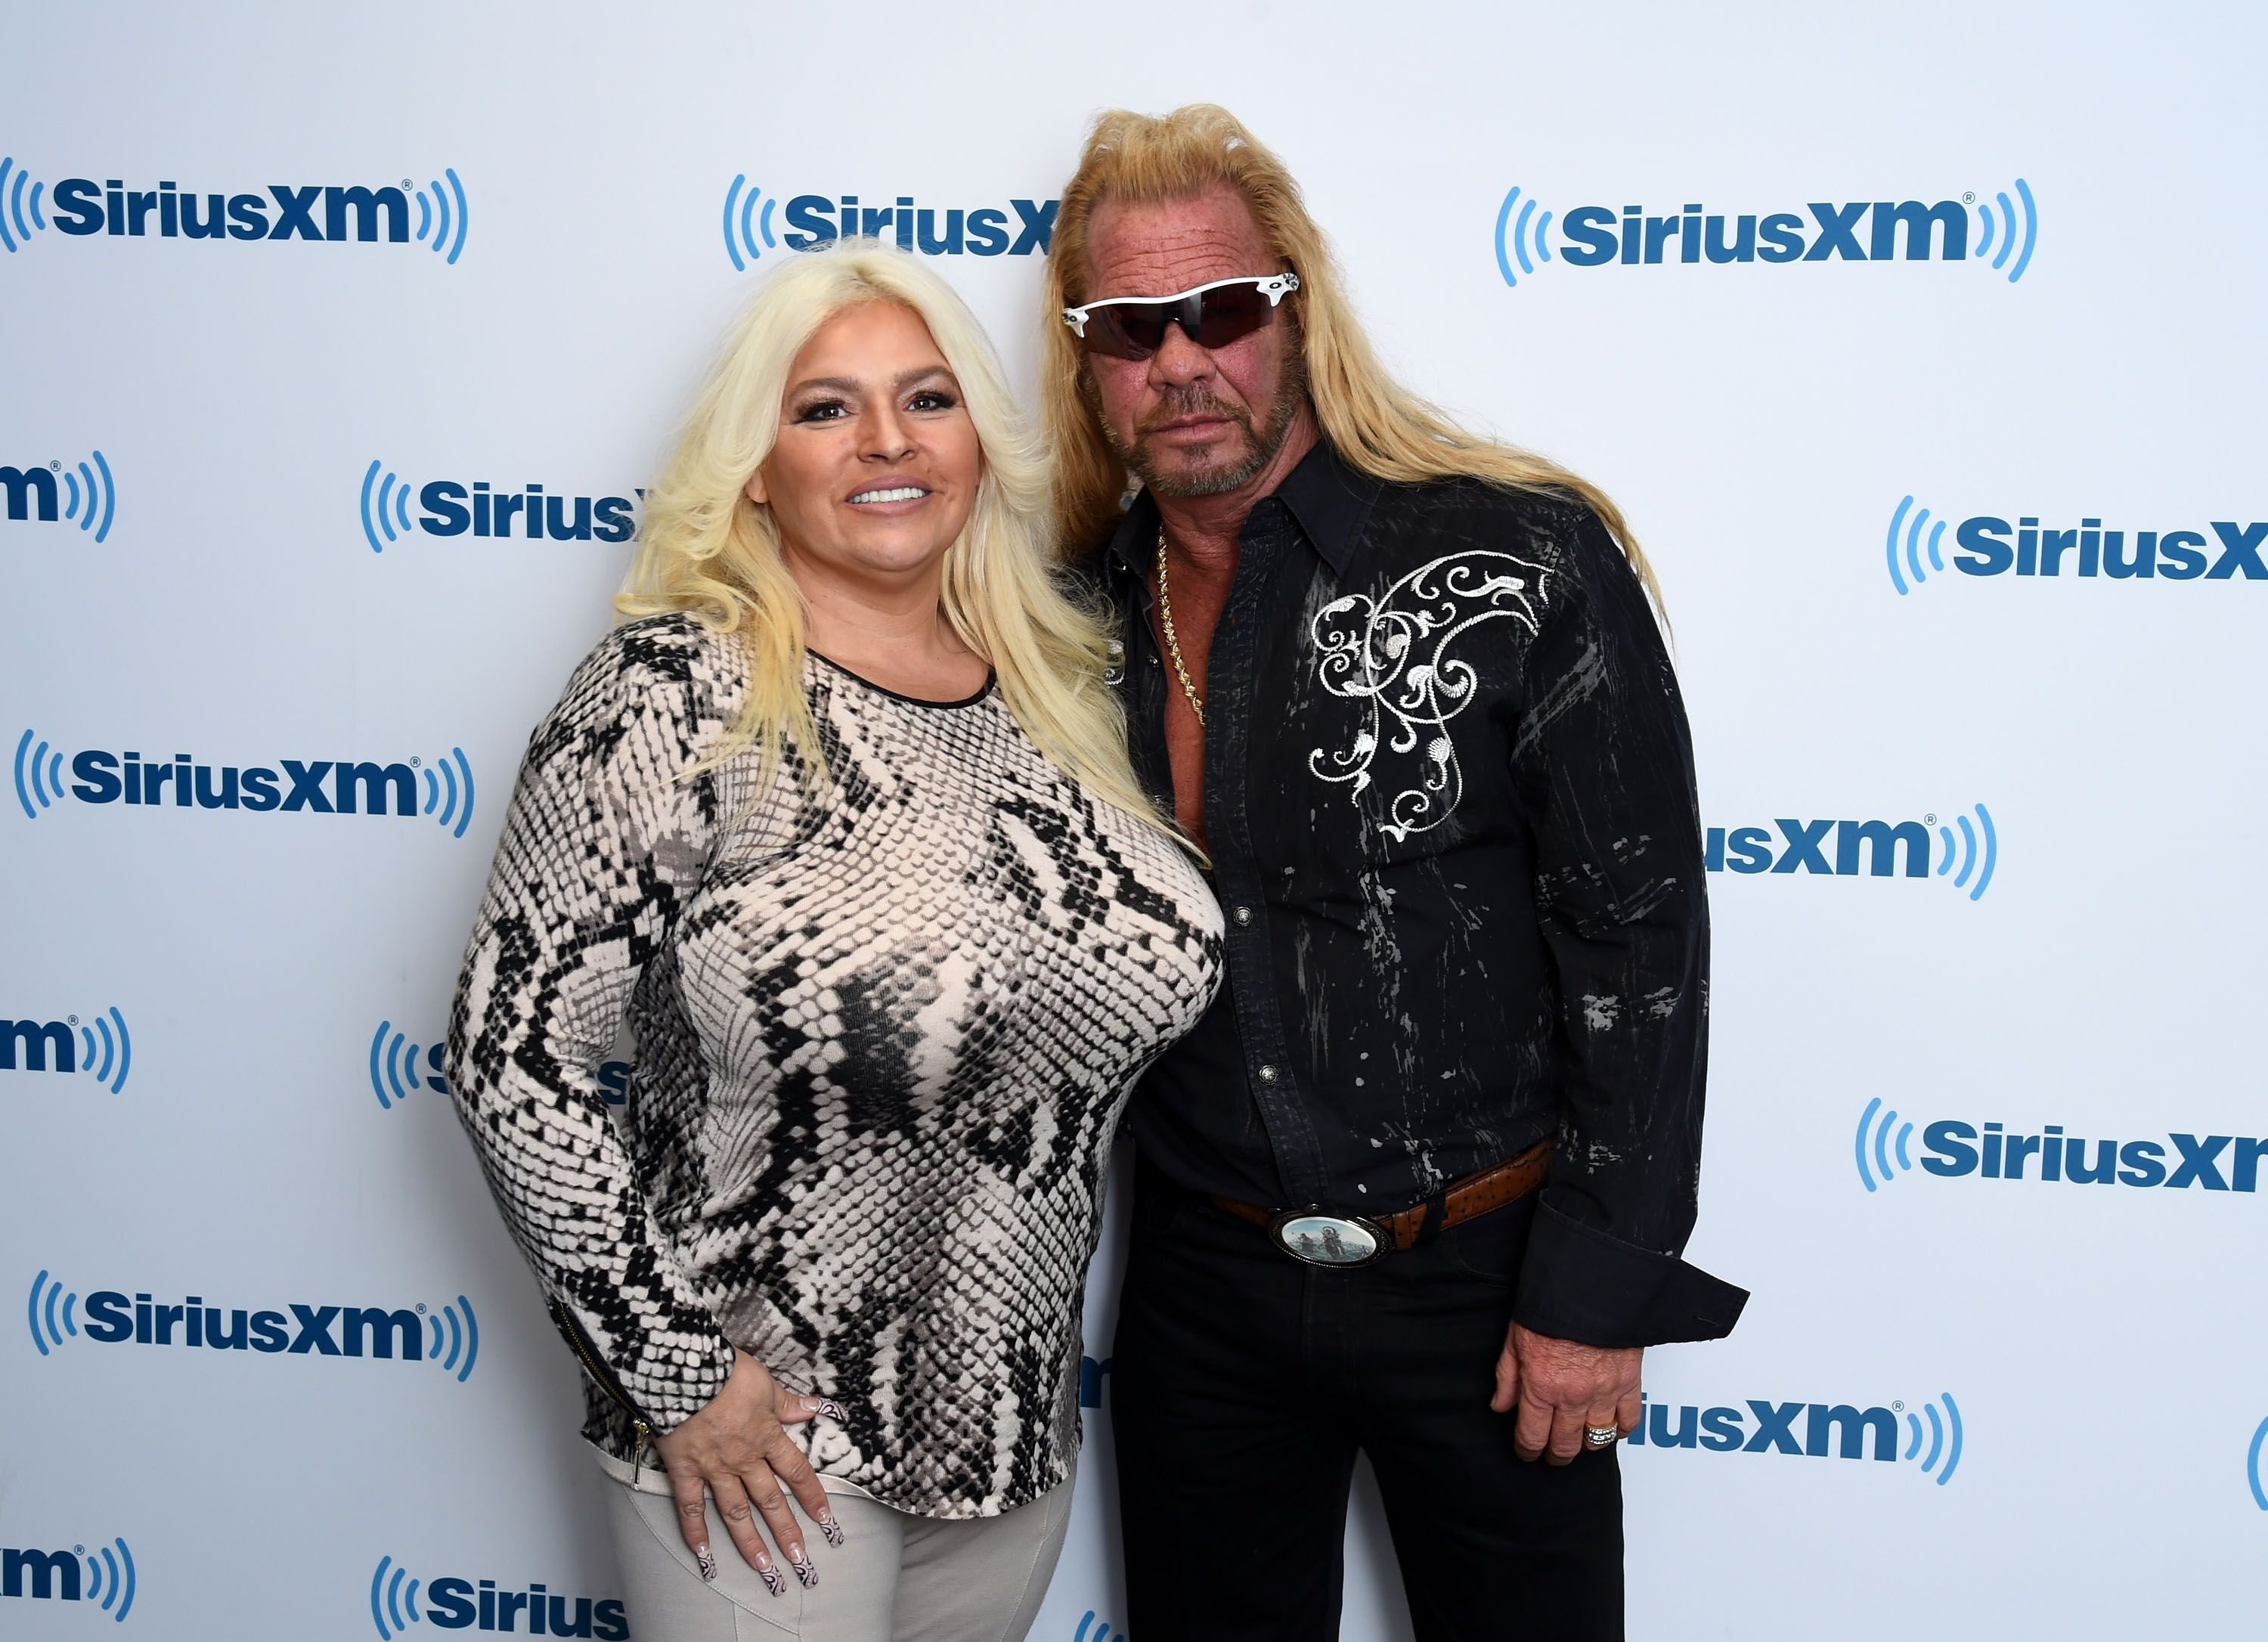 Beth Chapman and Dog the Bounty Hunter, Duane Chapman at the SiriusXM Studios on April 24, 2015 | Photo: Getty Images